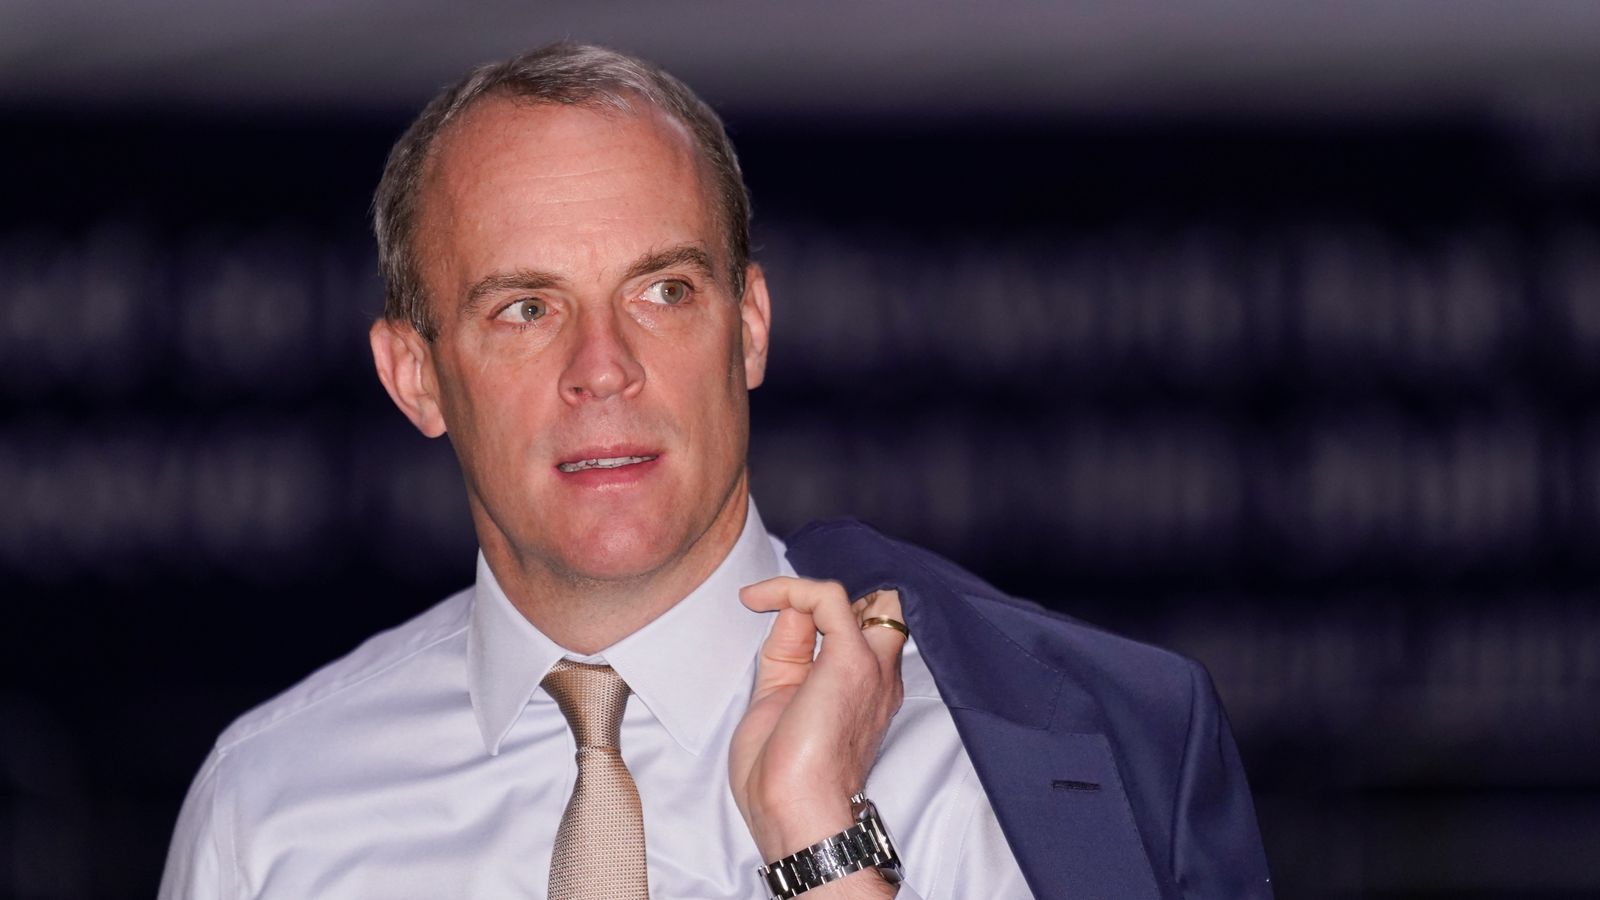 Dominic Raab bullying report has led to 'complete breakdown in trust between ministers and civil servants', thinktank says